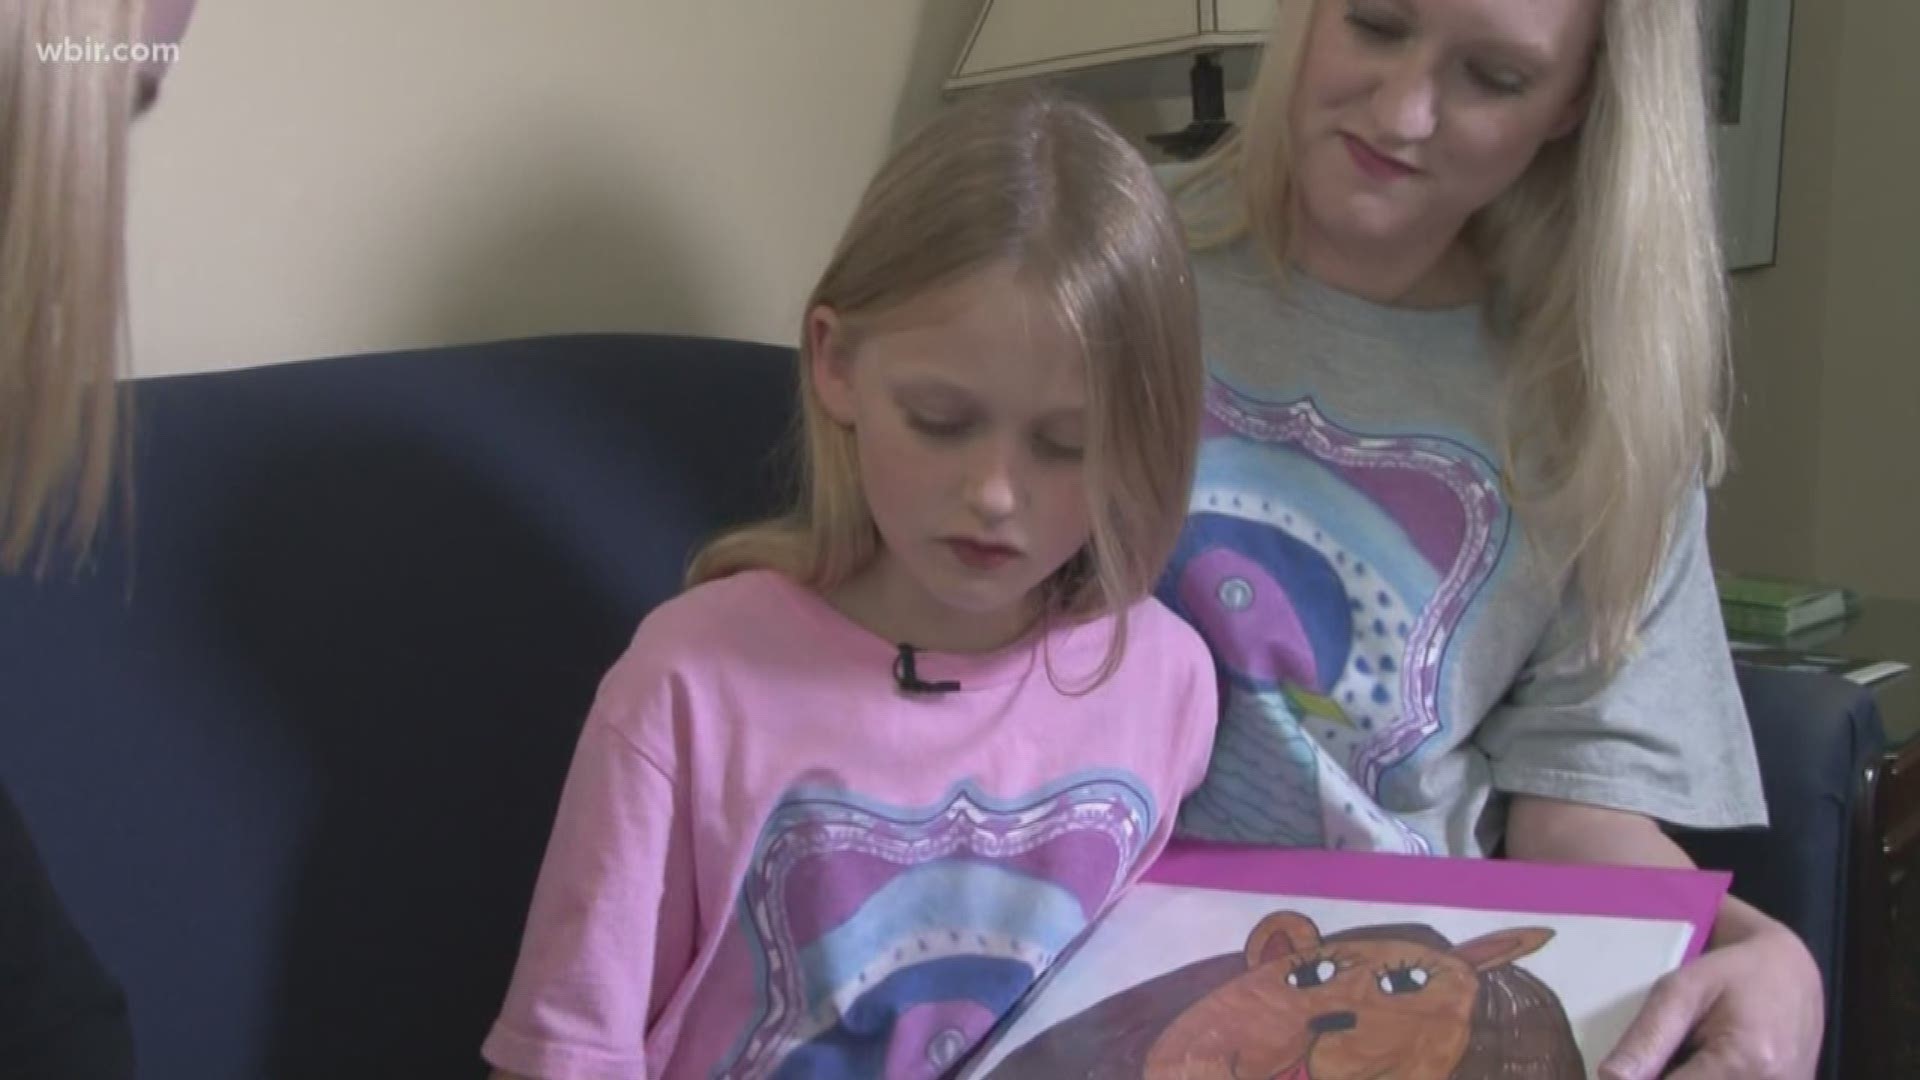 One little girl is using her passion for art to make patients' visits a little brighter.